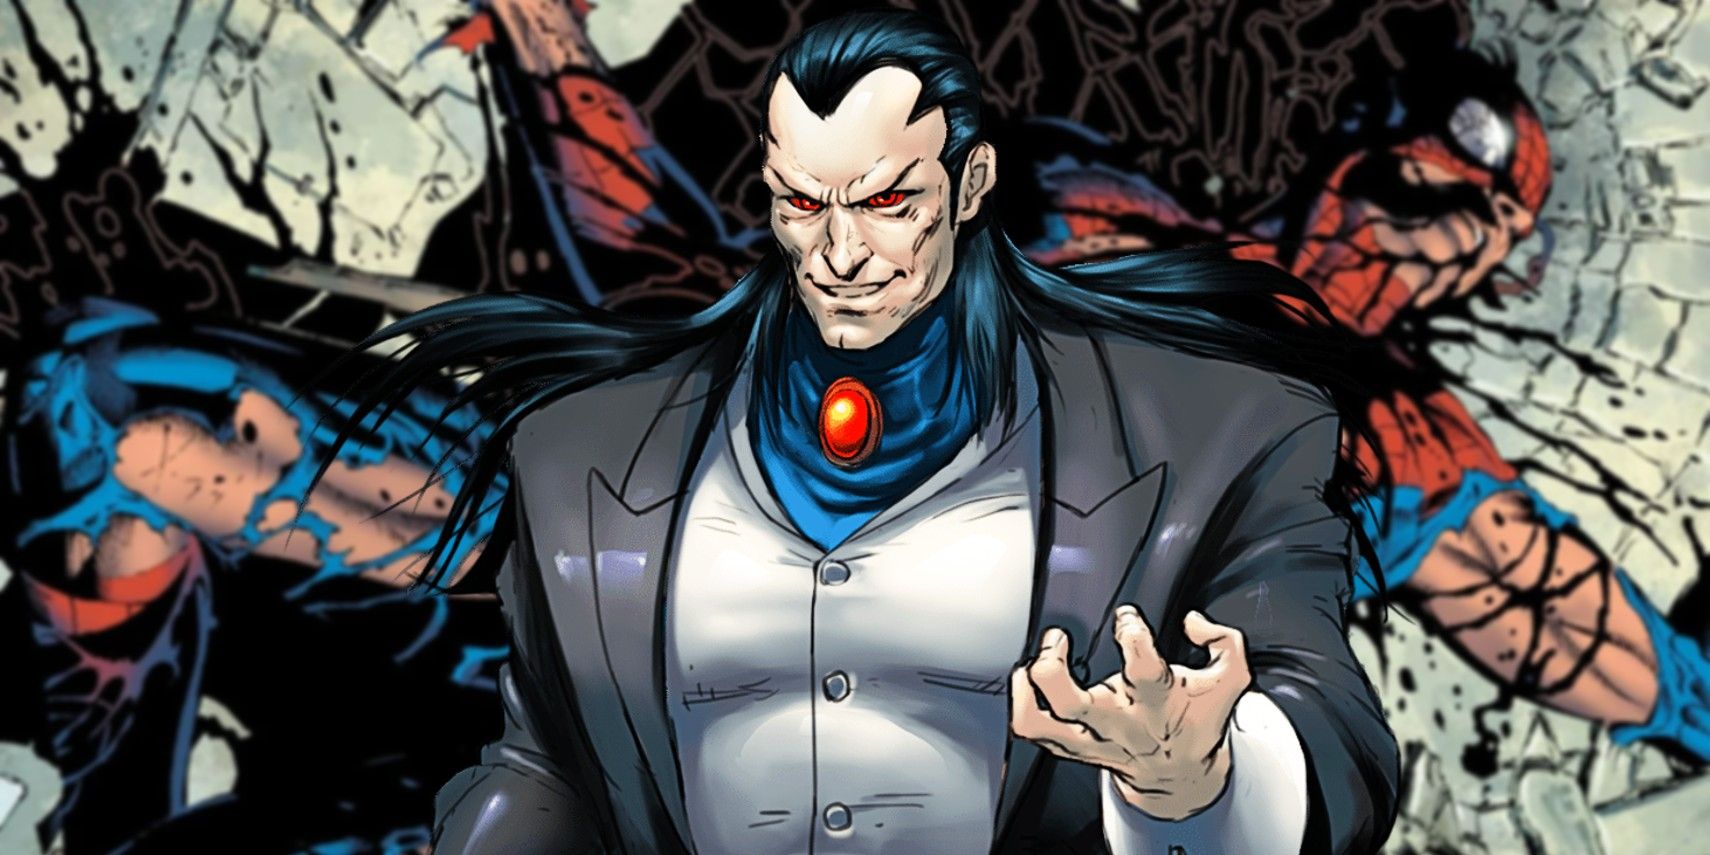 Morlun In front of an injured Spider-Man